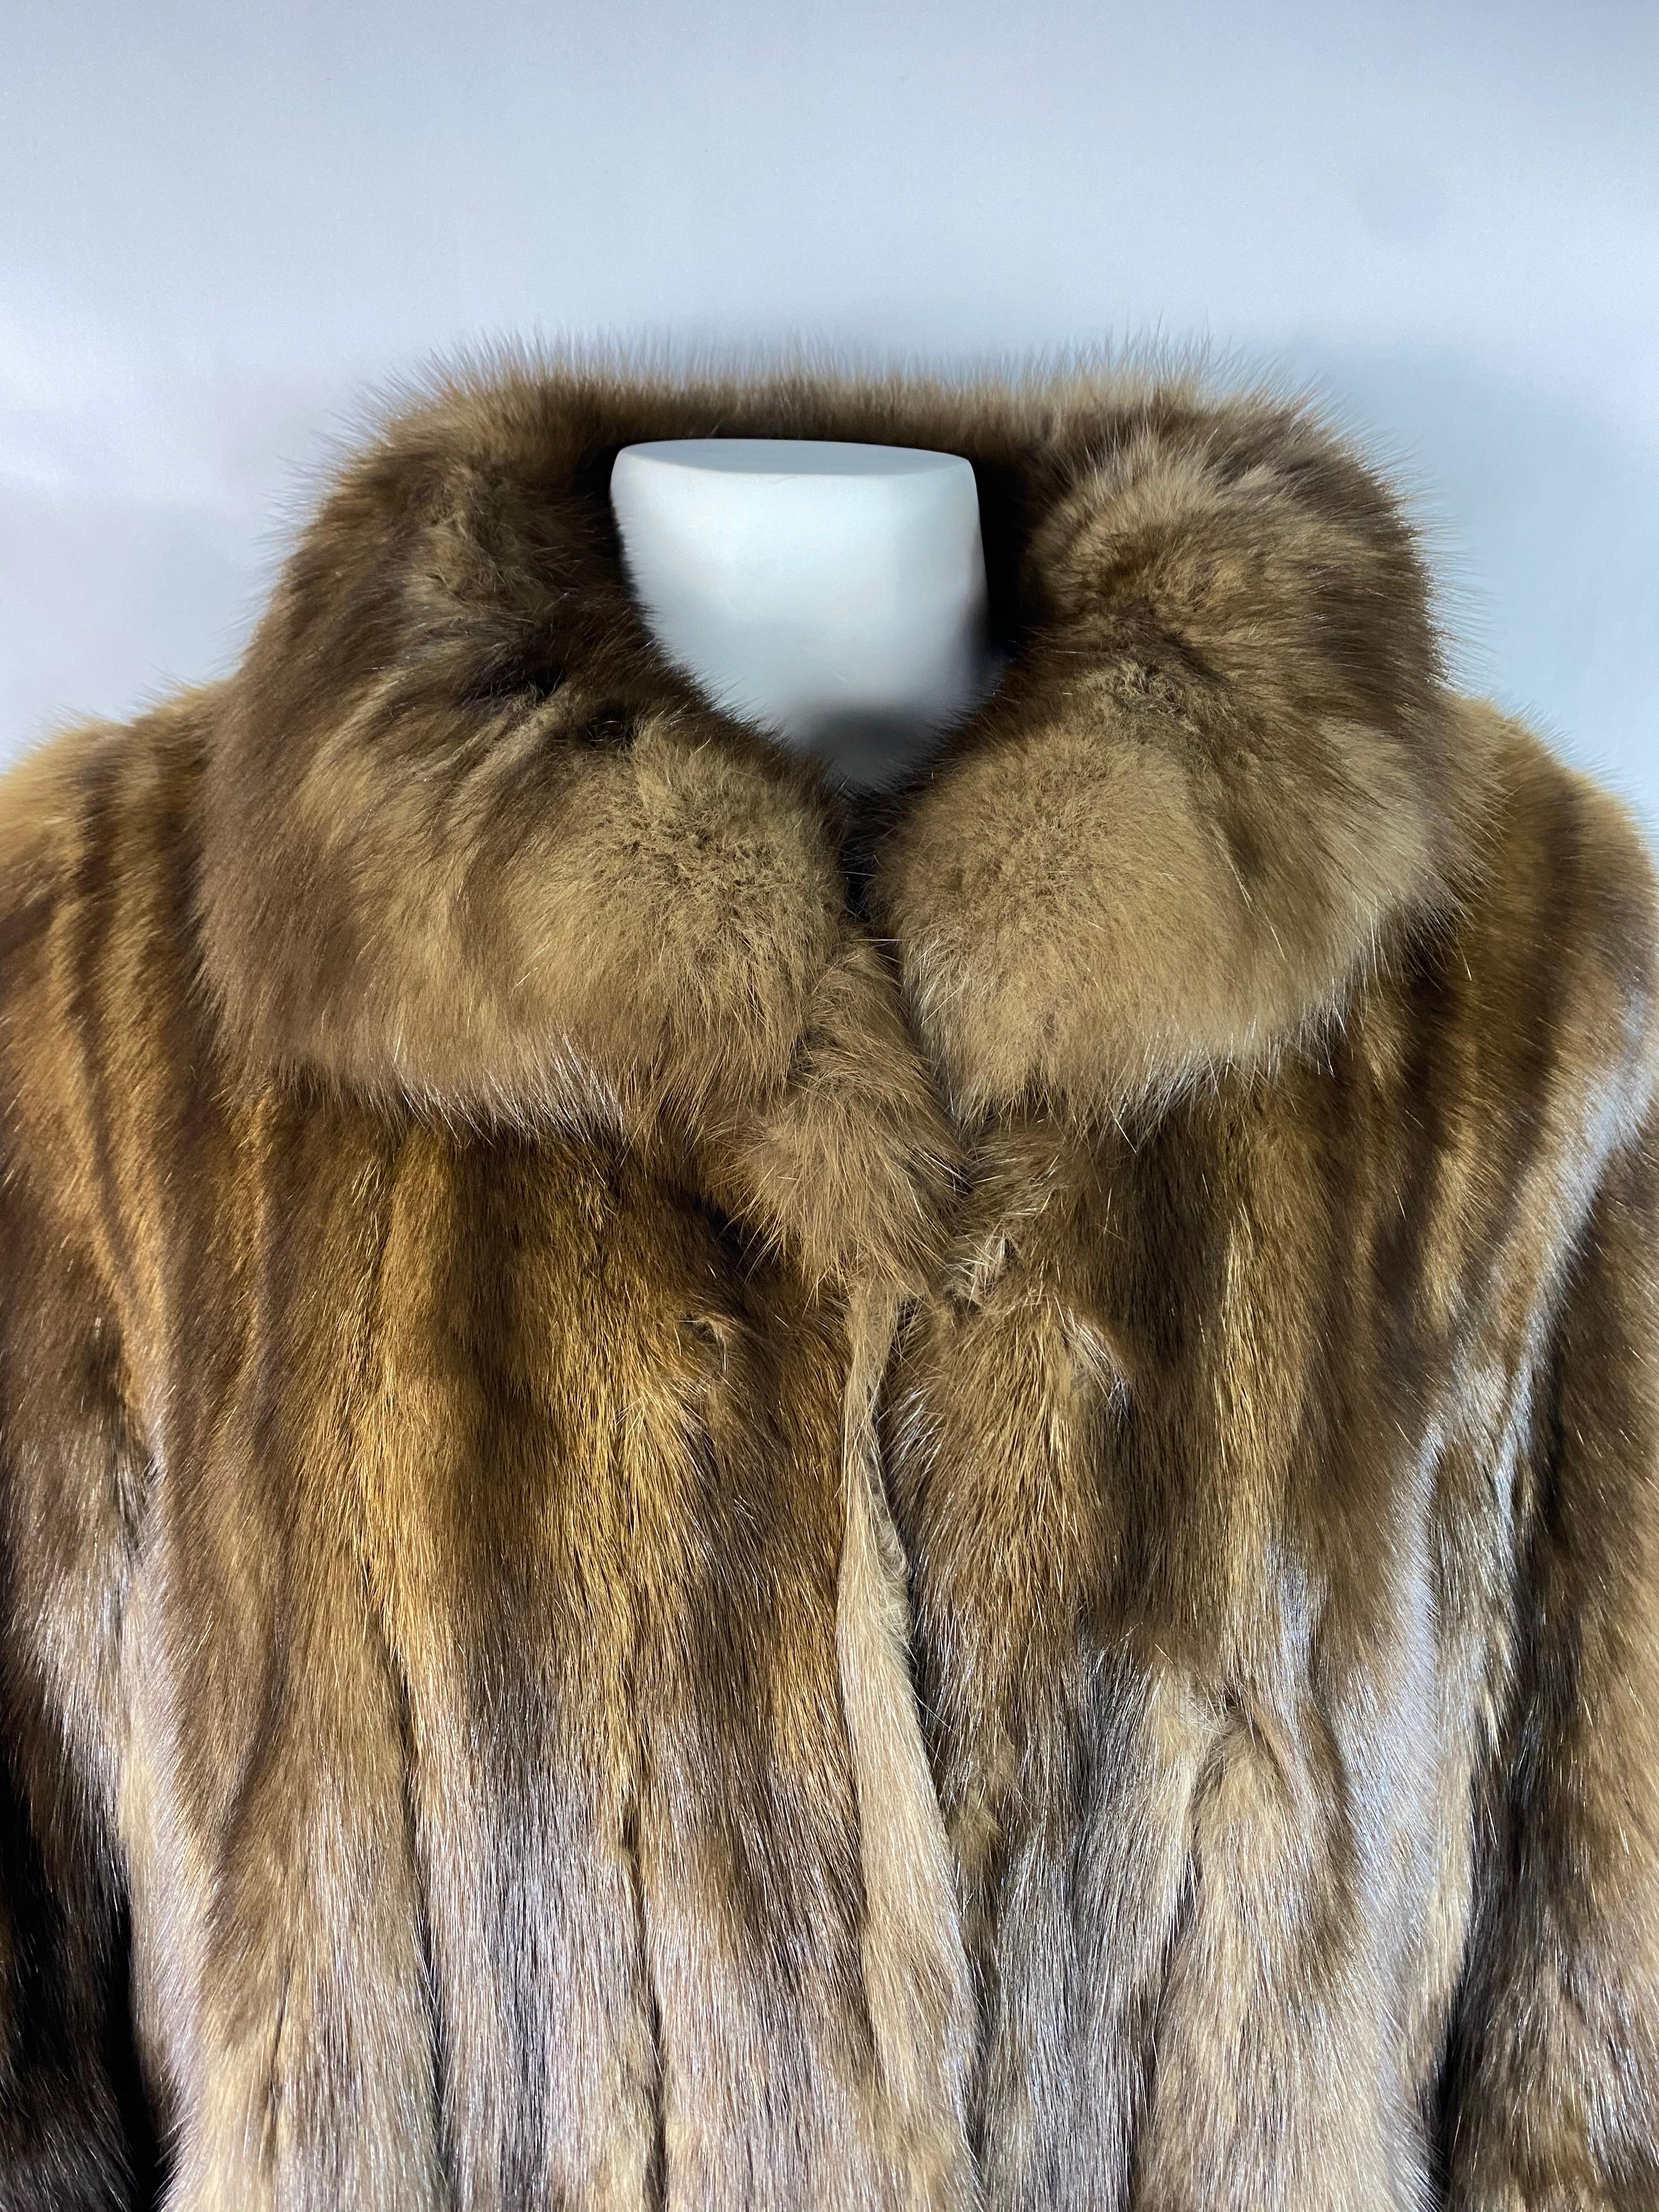 Product details:

Featuring 100% sable fur with double silk lining with collar and size pockets detail. Front double hook closure with inner belt. Mid length. Customized with embroidered first and last name of the owner Nadine Krakov on the inside.